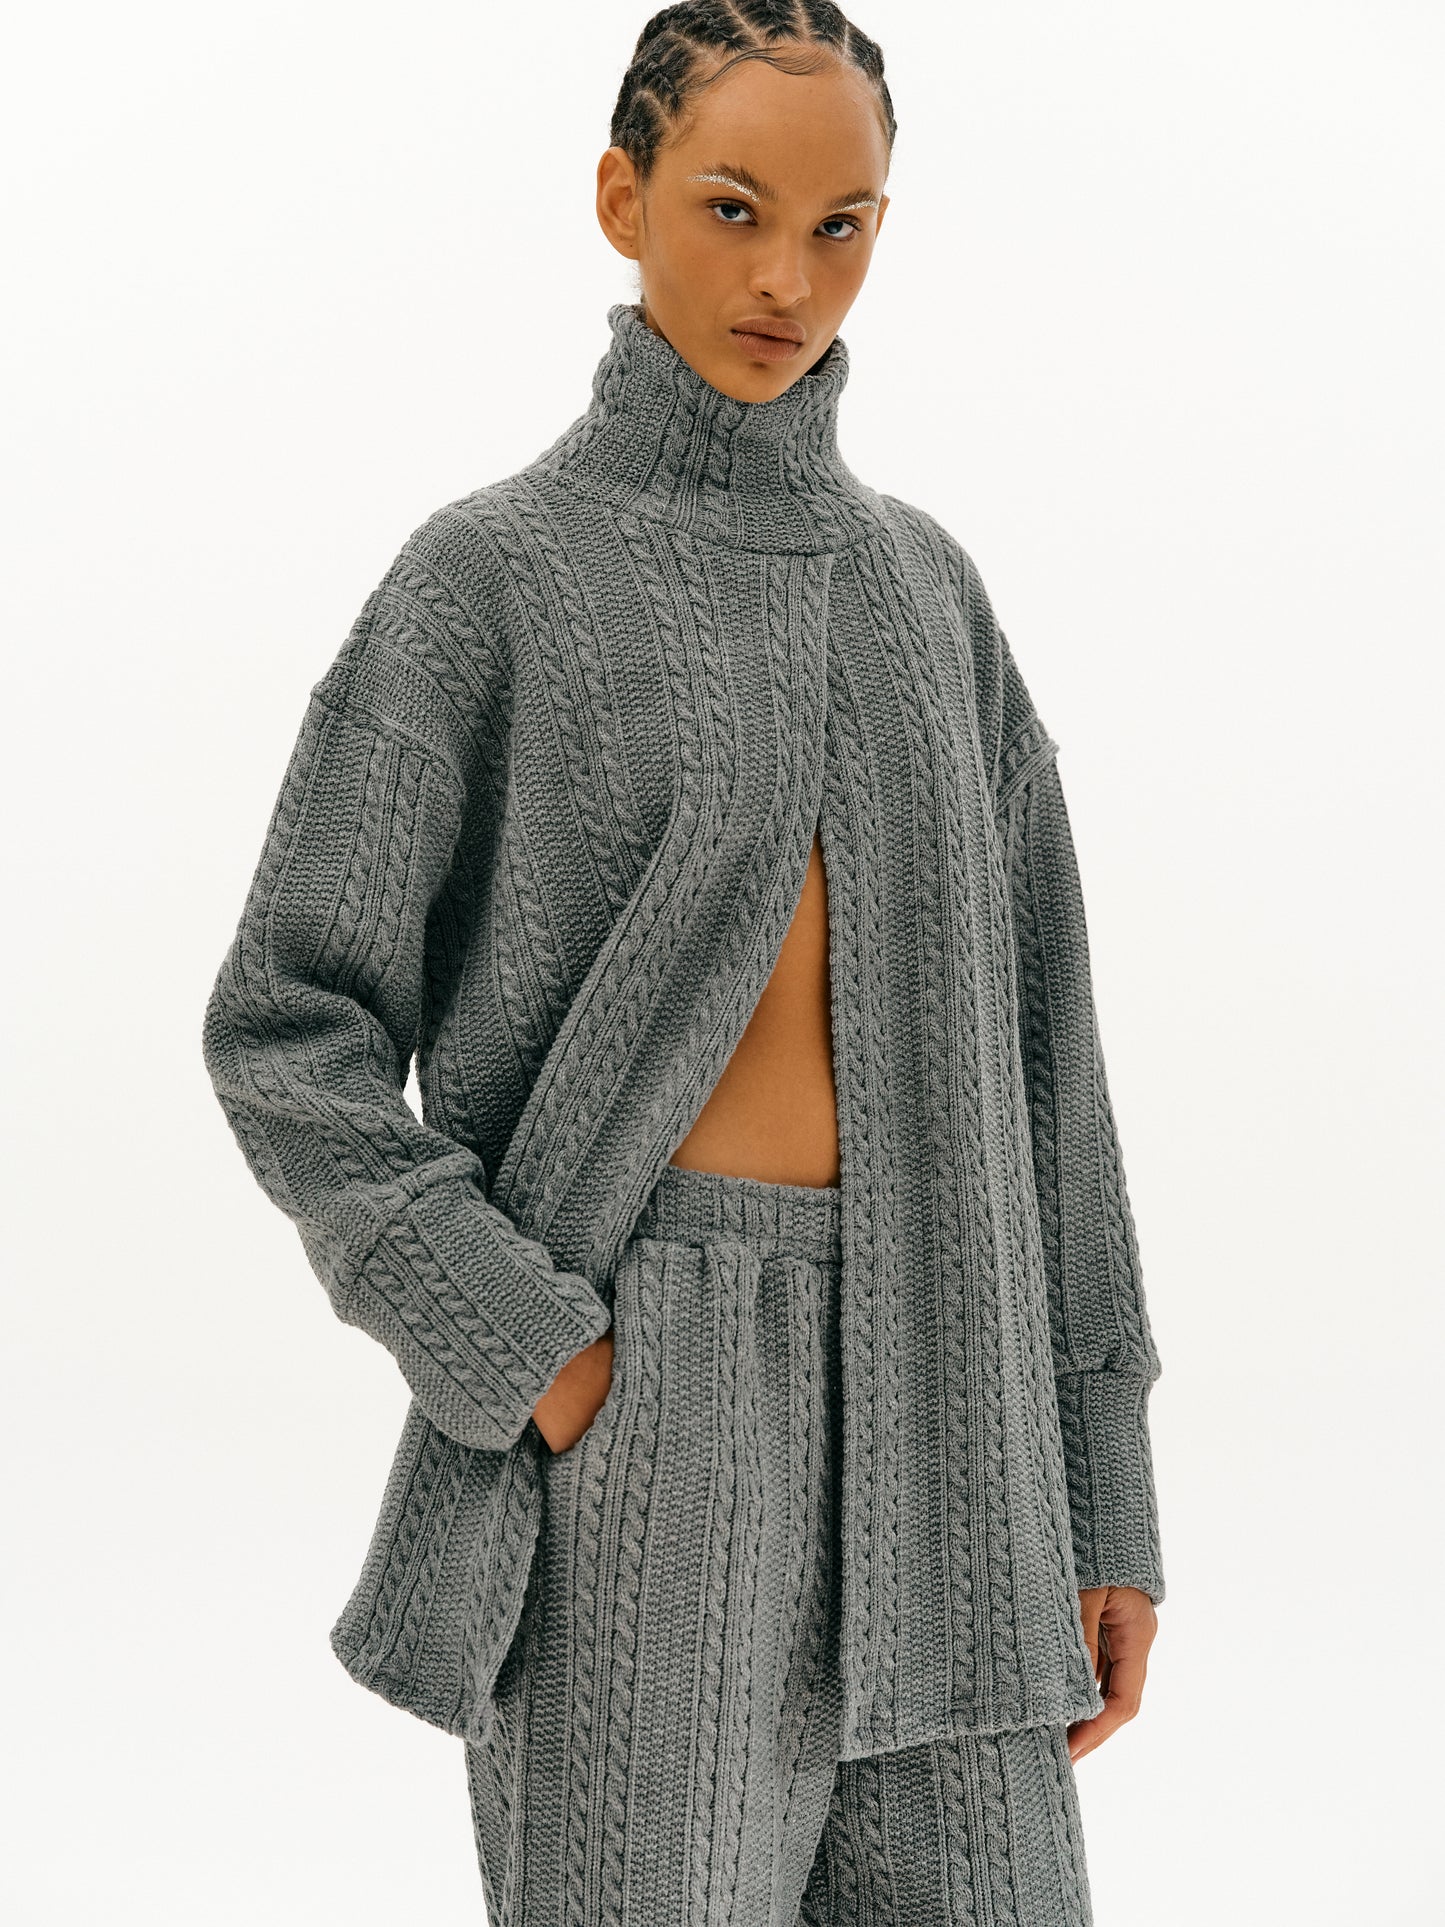 Cape Turtleneck Pullover, Charcoal Grey